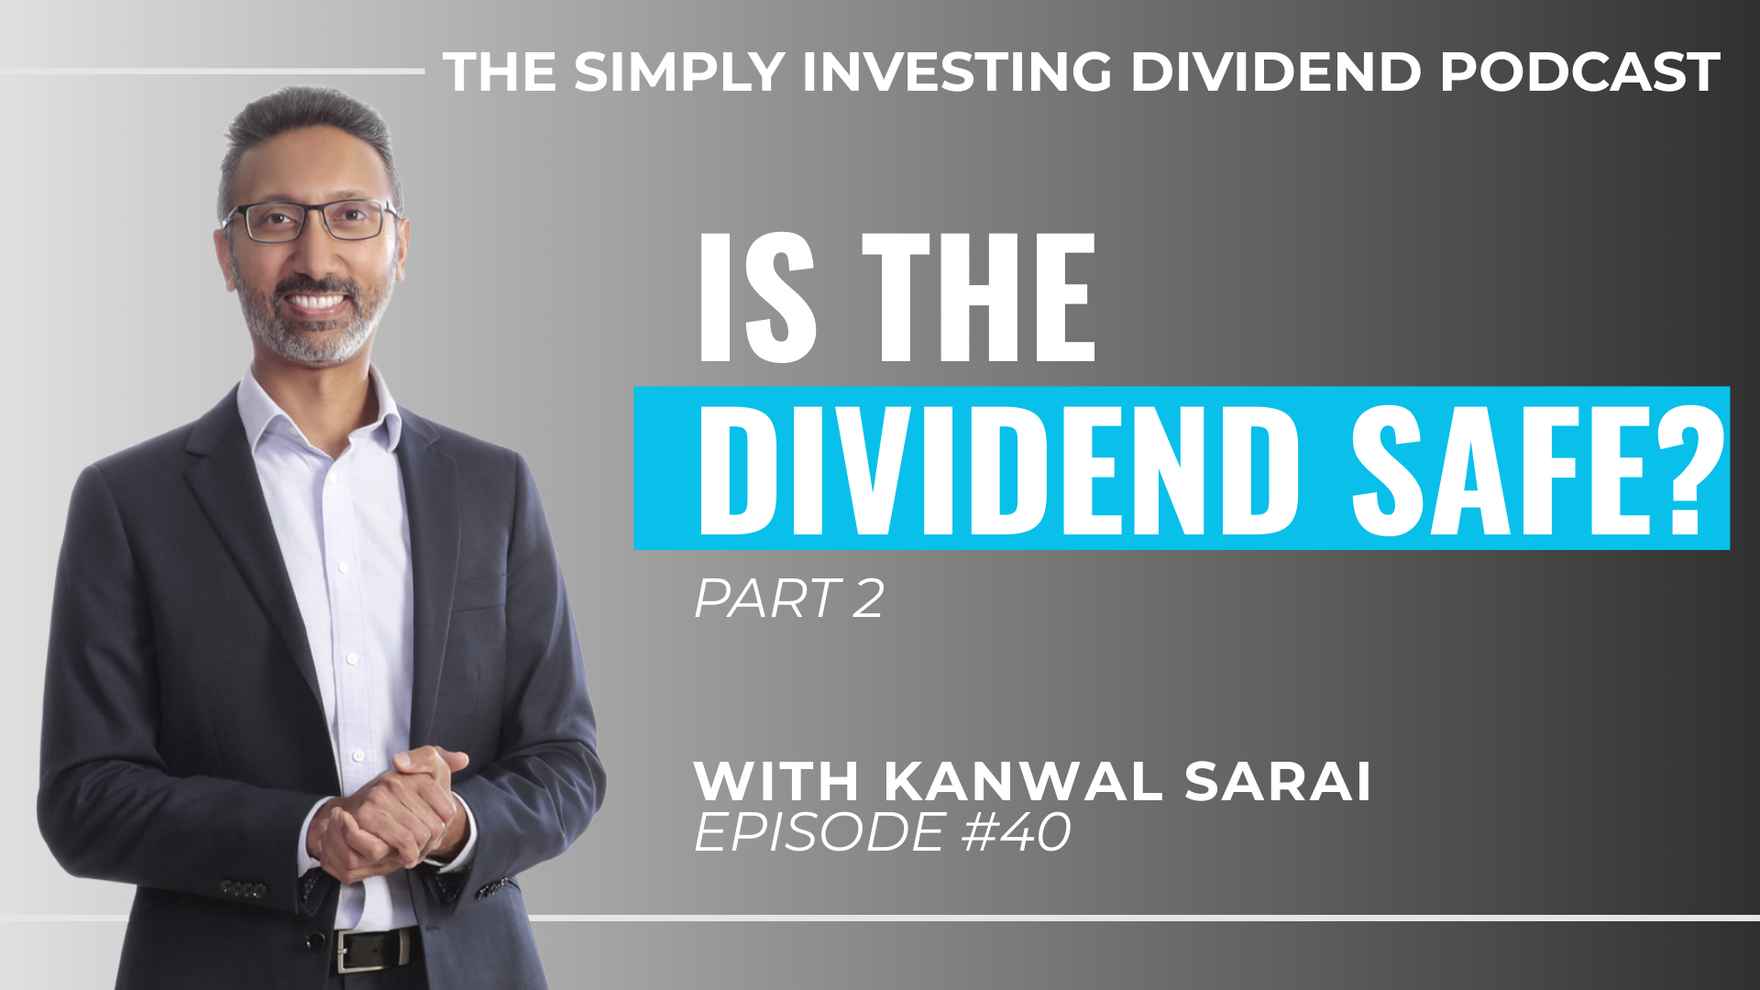 Simply Investing Dividend Podcast Episode 40 - How Do You Know If The Dividend Is Safe